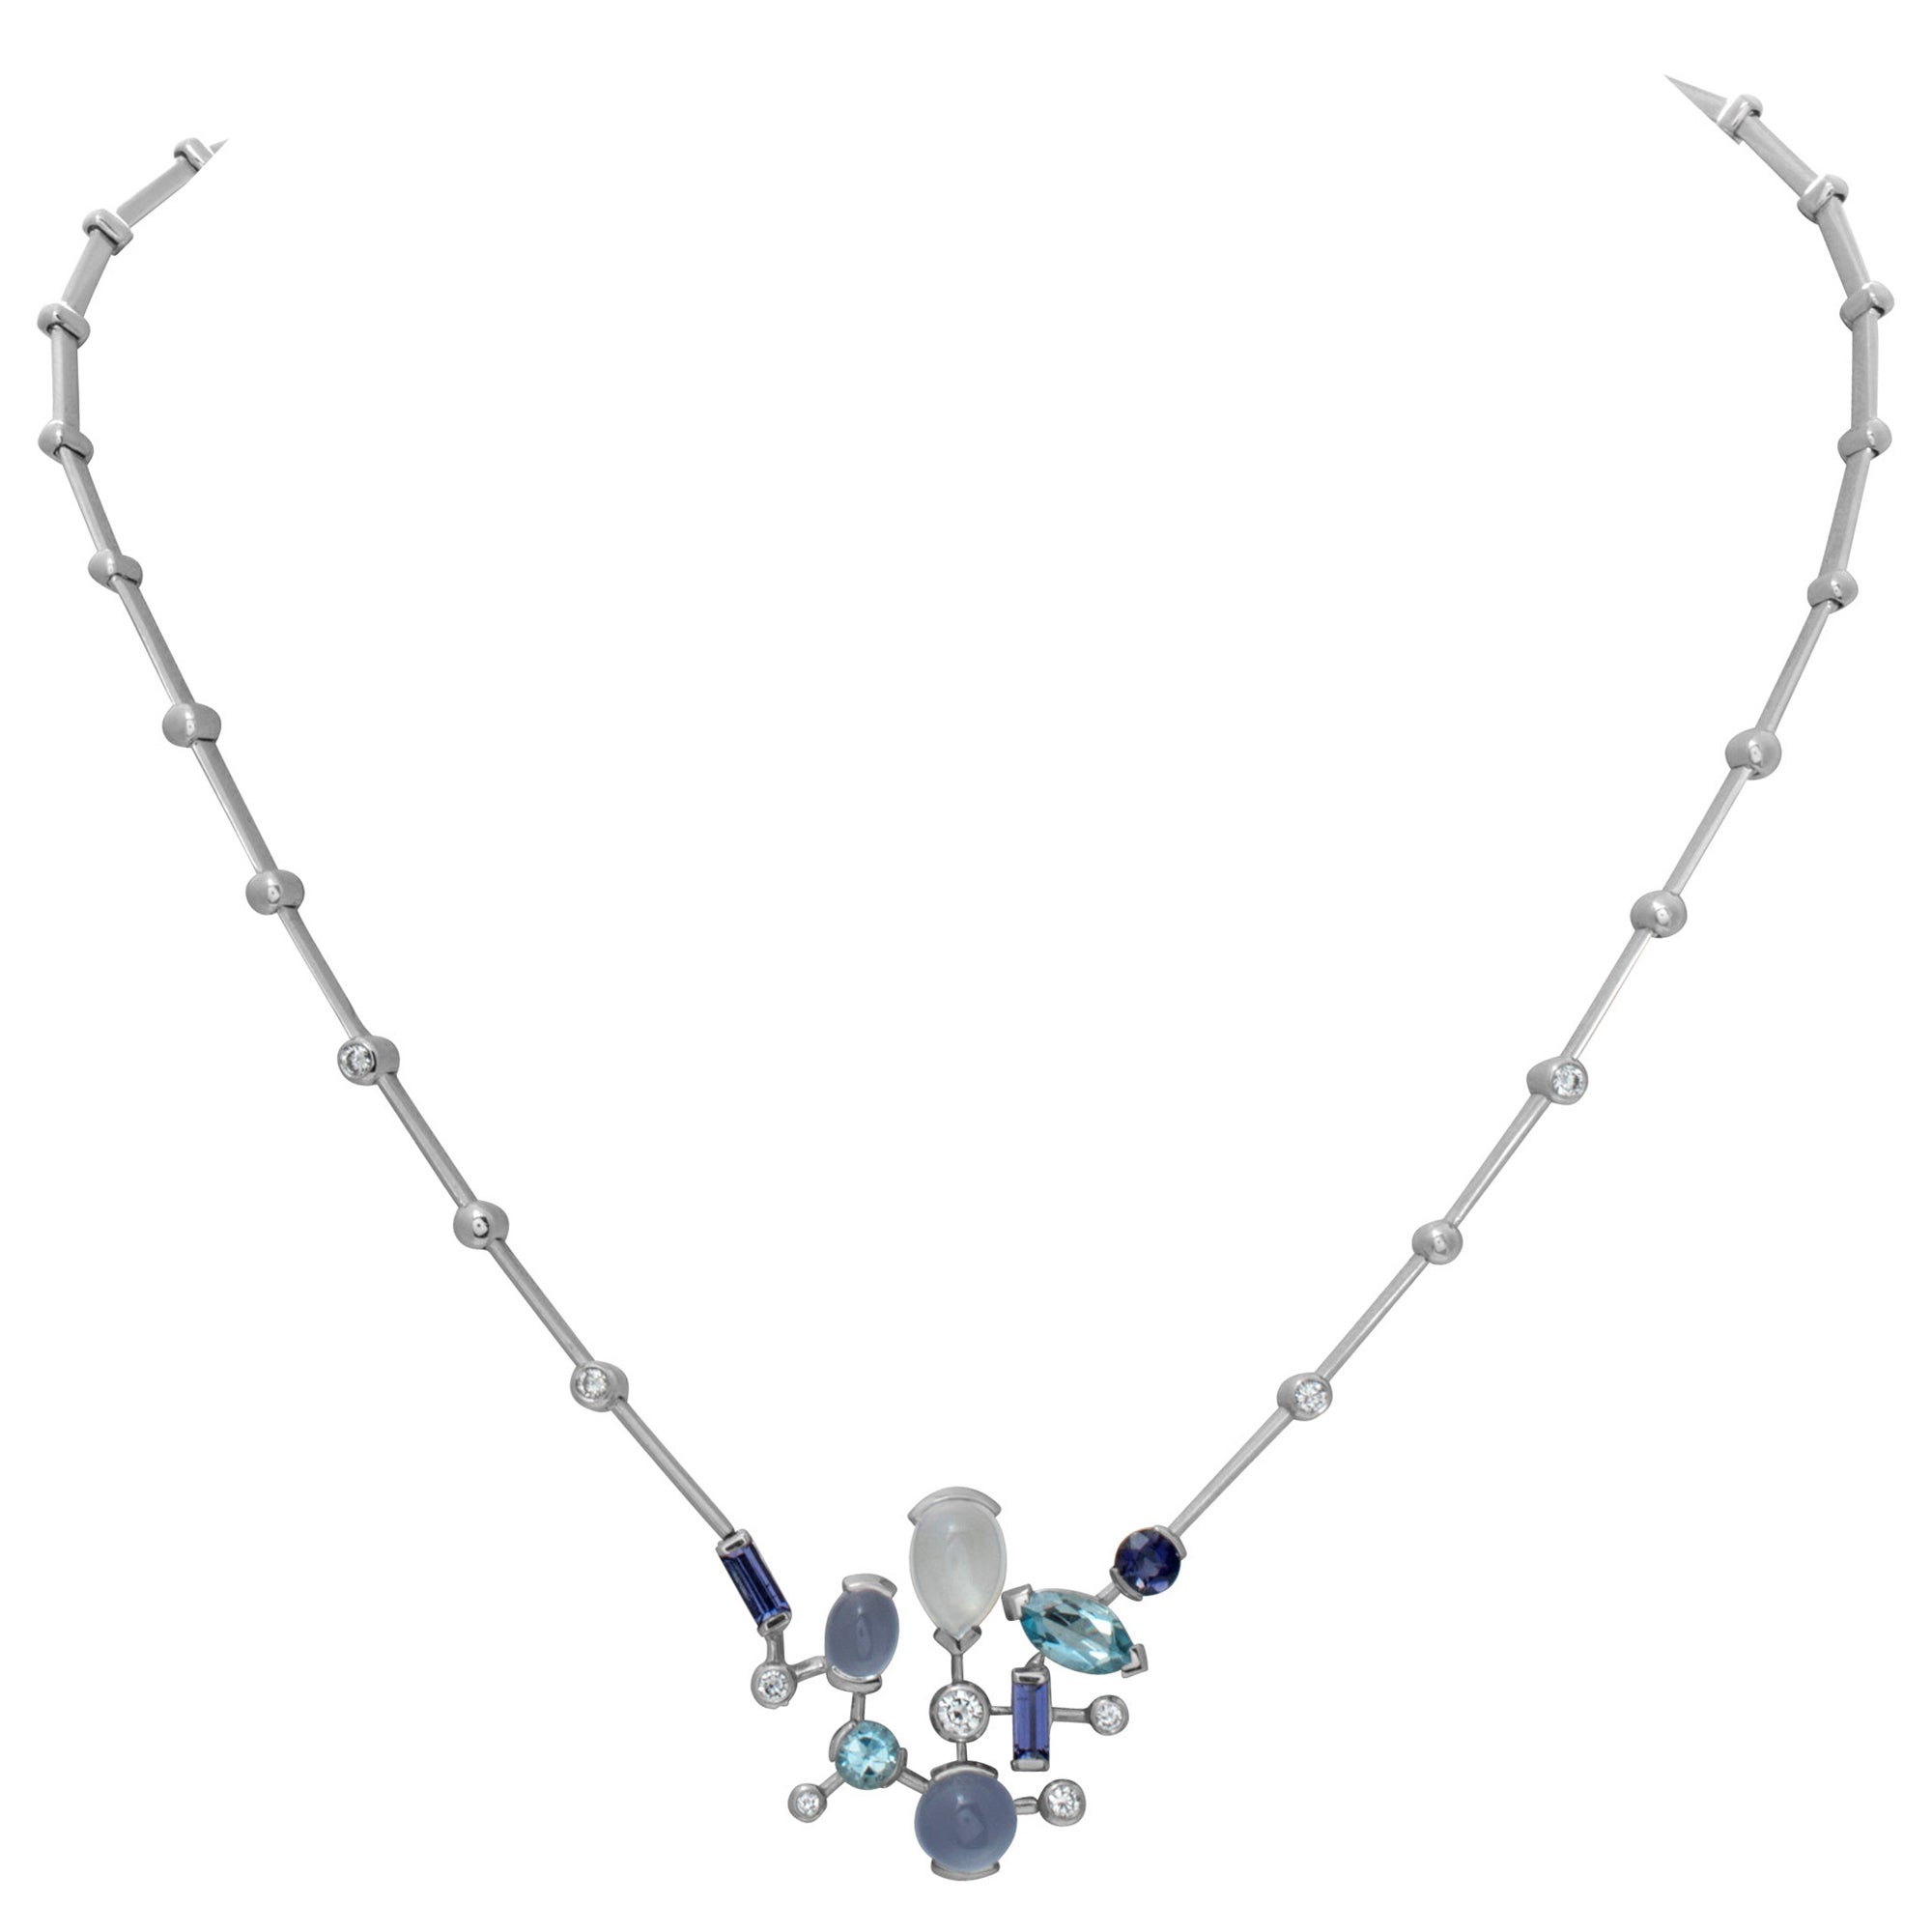 Cartier "Meli Melo" 18k White Gold Necklace with Moonstone and Aquamarine For Sale